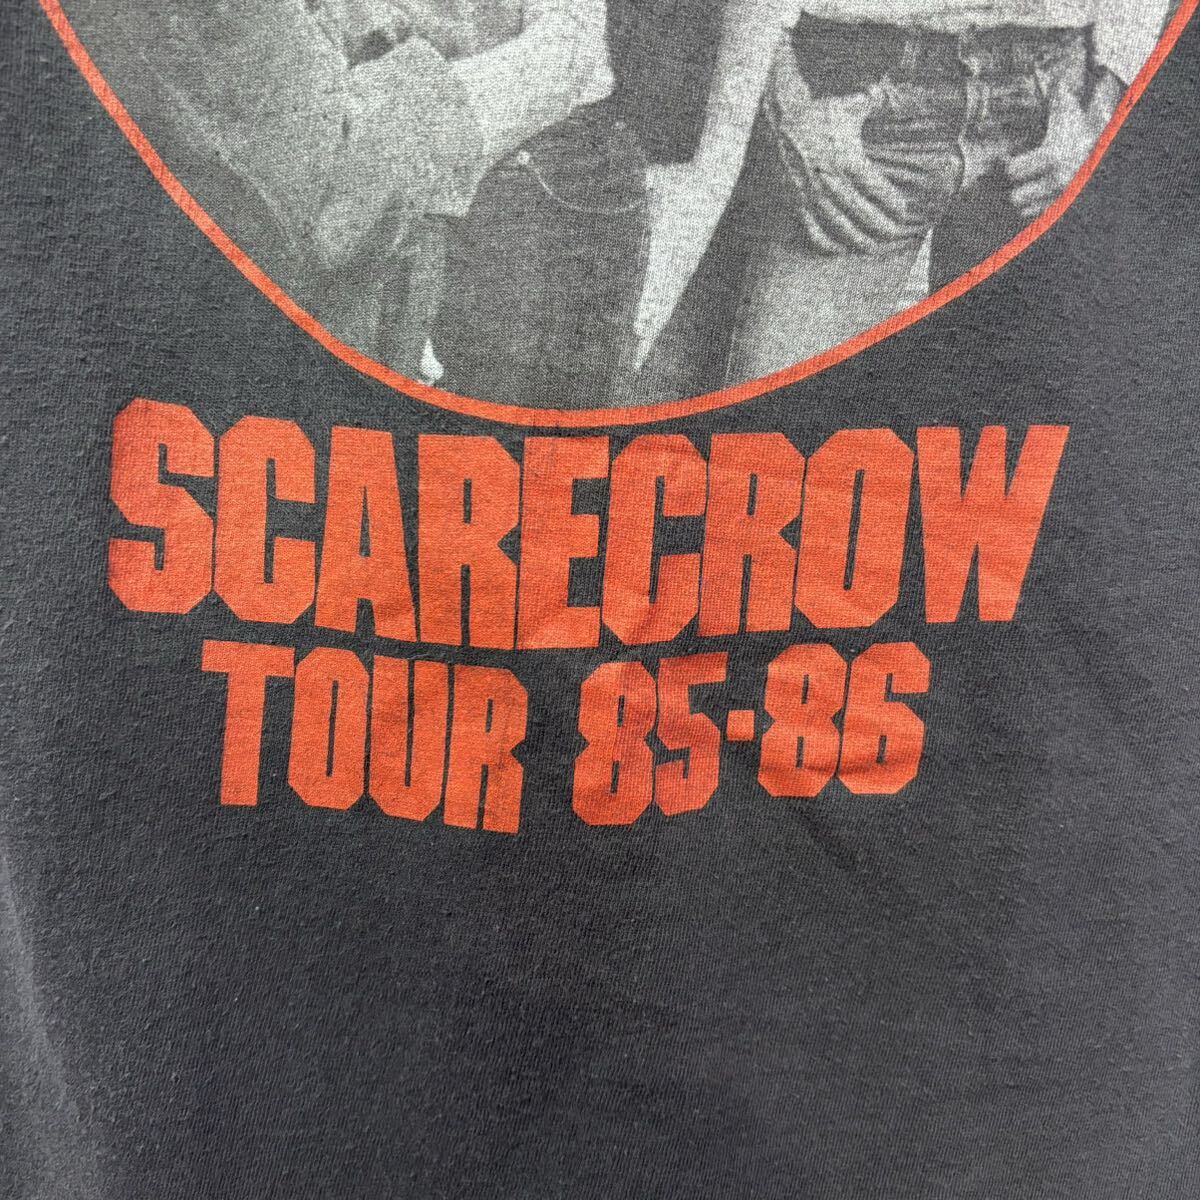 80’s USA製　JOHN COUGER MELLENCAMP SCARECROW ジョンメレンキャンプ　スケアクロウ　バンド　ロック　Tシャツ 古着　アメリカ古着